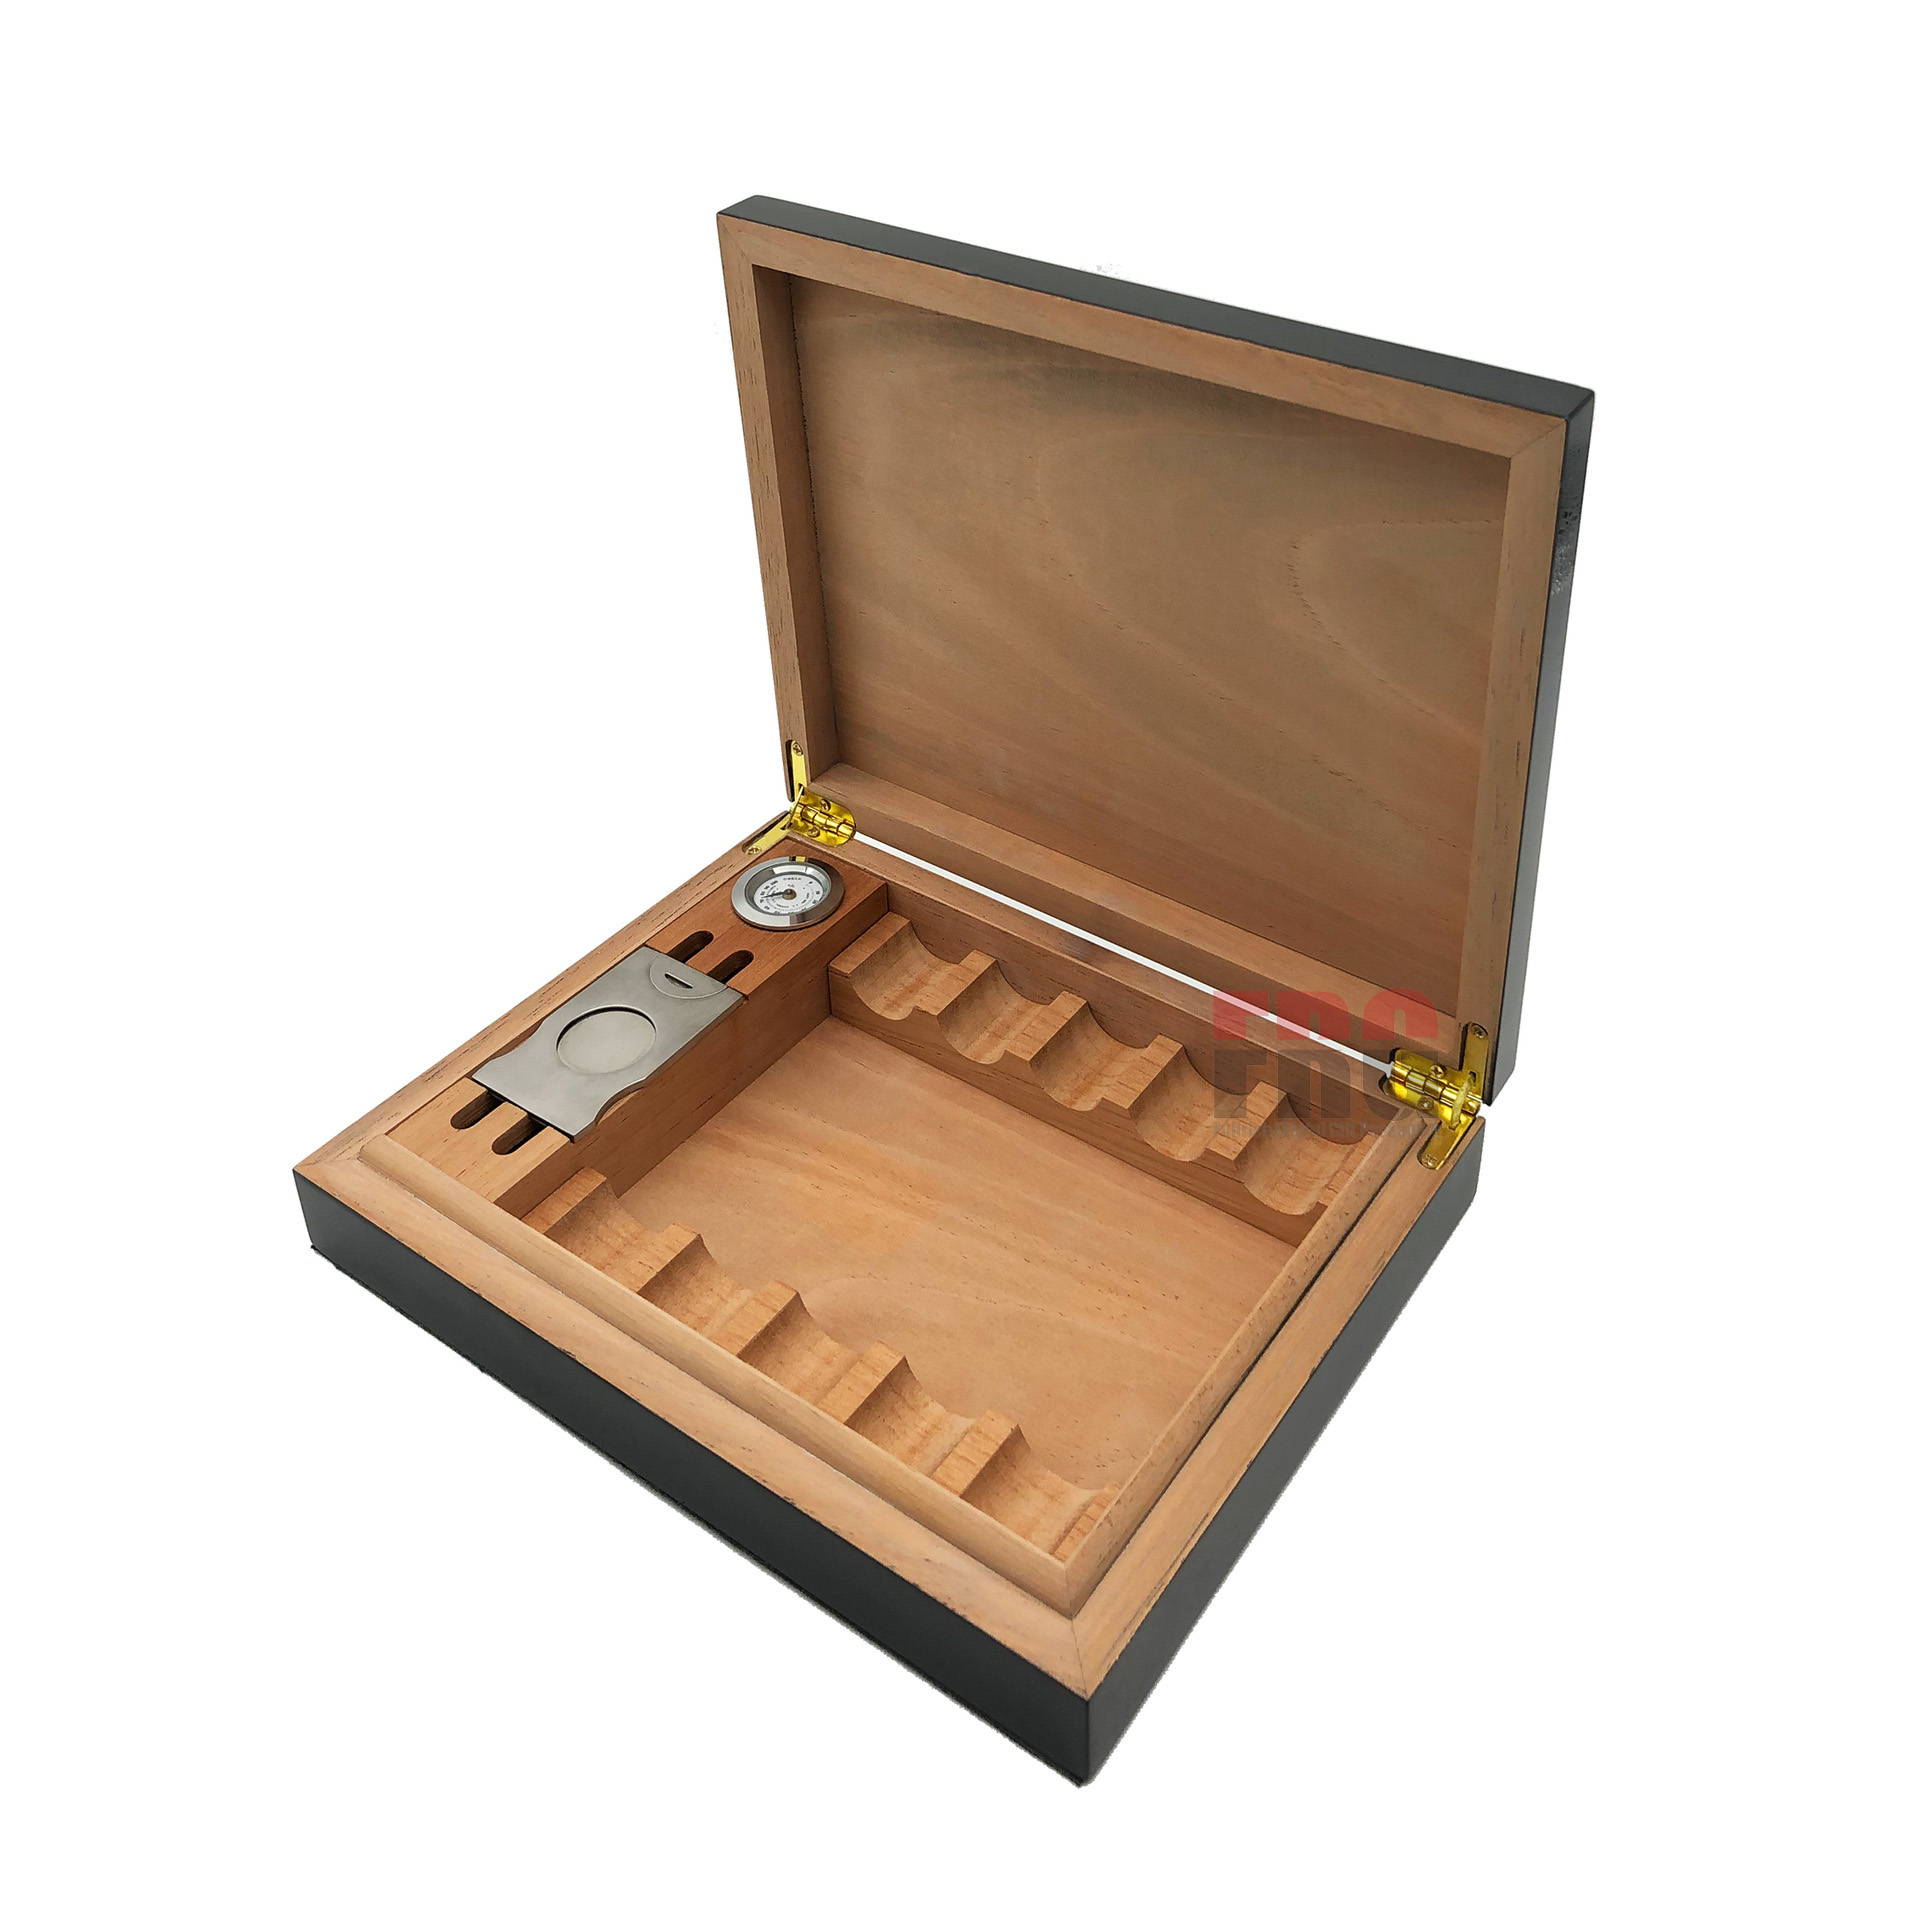 Wholesale Wood Box of Cigars with Design Cigar Gift Package with LOGO Hold 10 Cigars